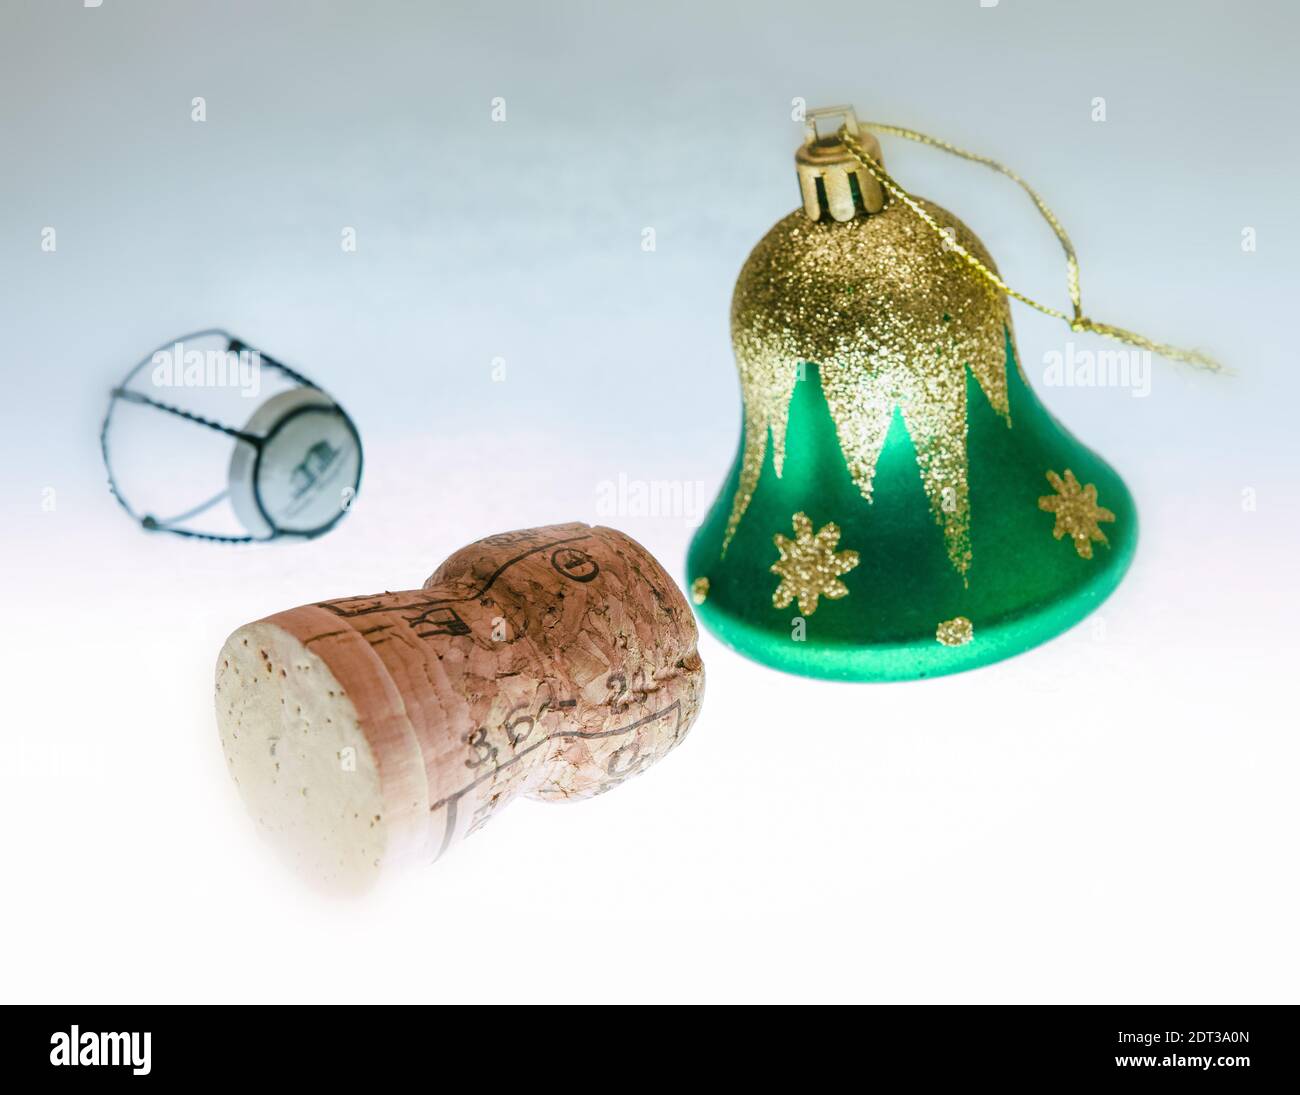 Party time, on the light table we see a champagne cork and a Christmas decoration. Stock Photo